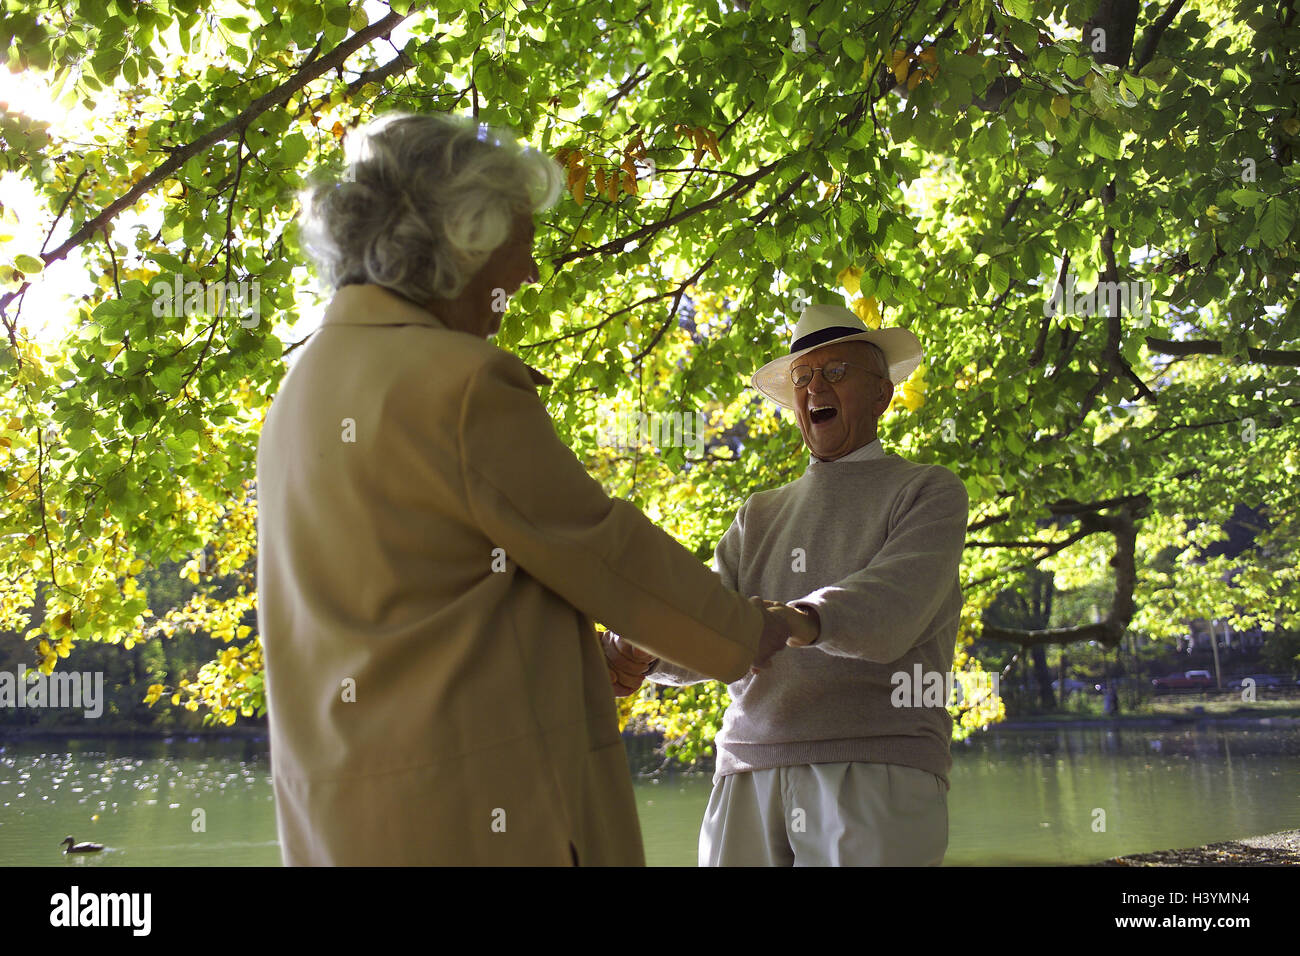 Park, Senior couple, happy, dance couple, senior citizens, partnership, friendship, Before, respect, happy, falls in love, love, affection, together, laugh, hold exuberance, cheerfulness, Ringlet-purely, eye contact, hands, dance, fun, joy, joy life, enterprising, park, river, riverside, care, headgear, glasses, wearers glasses, late summers, tenderness dance couple, Stock Photo